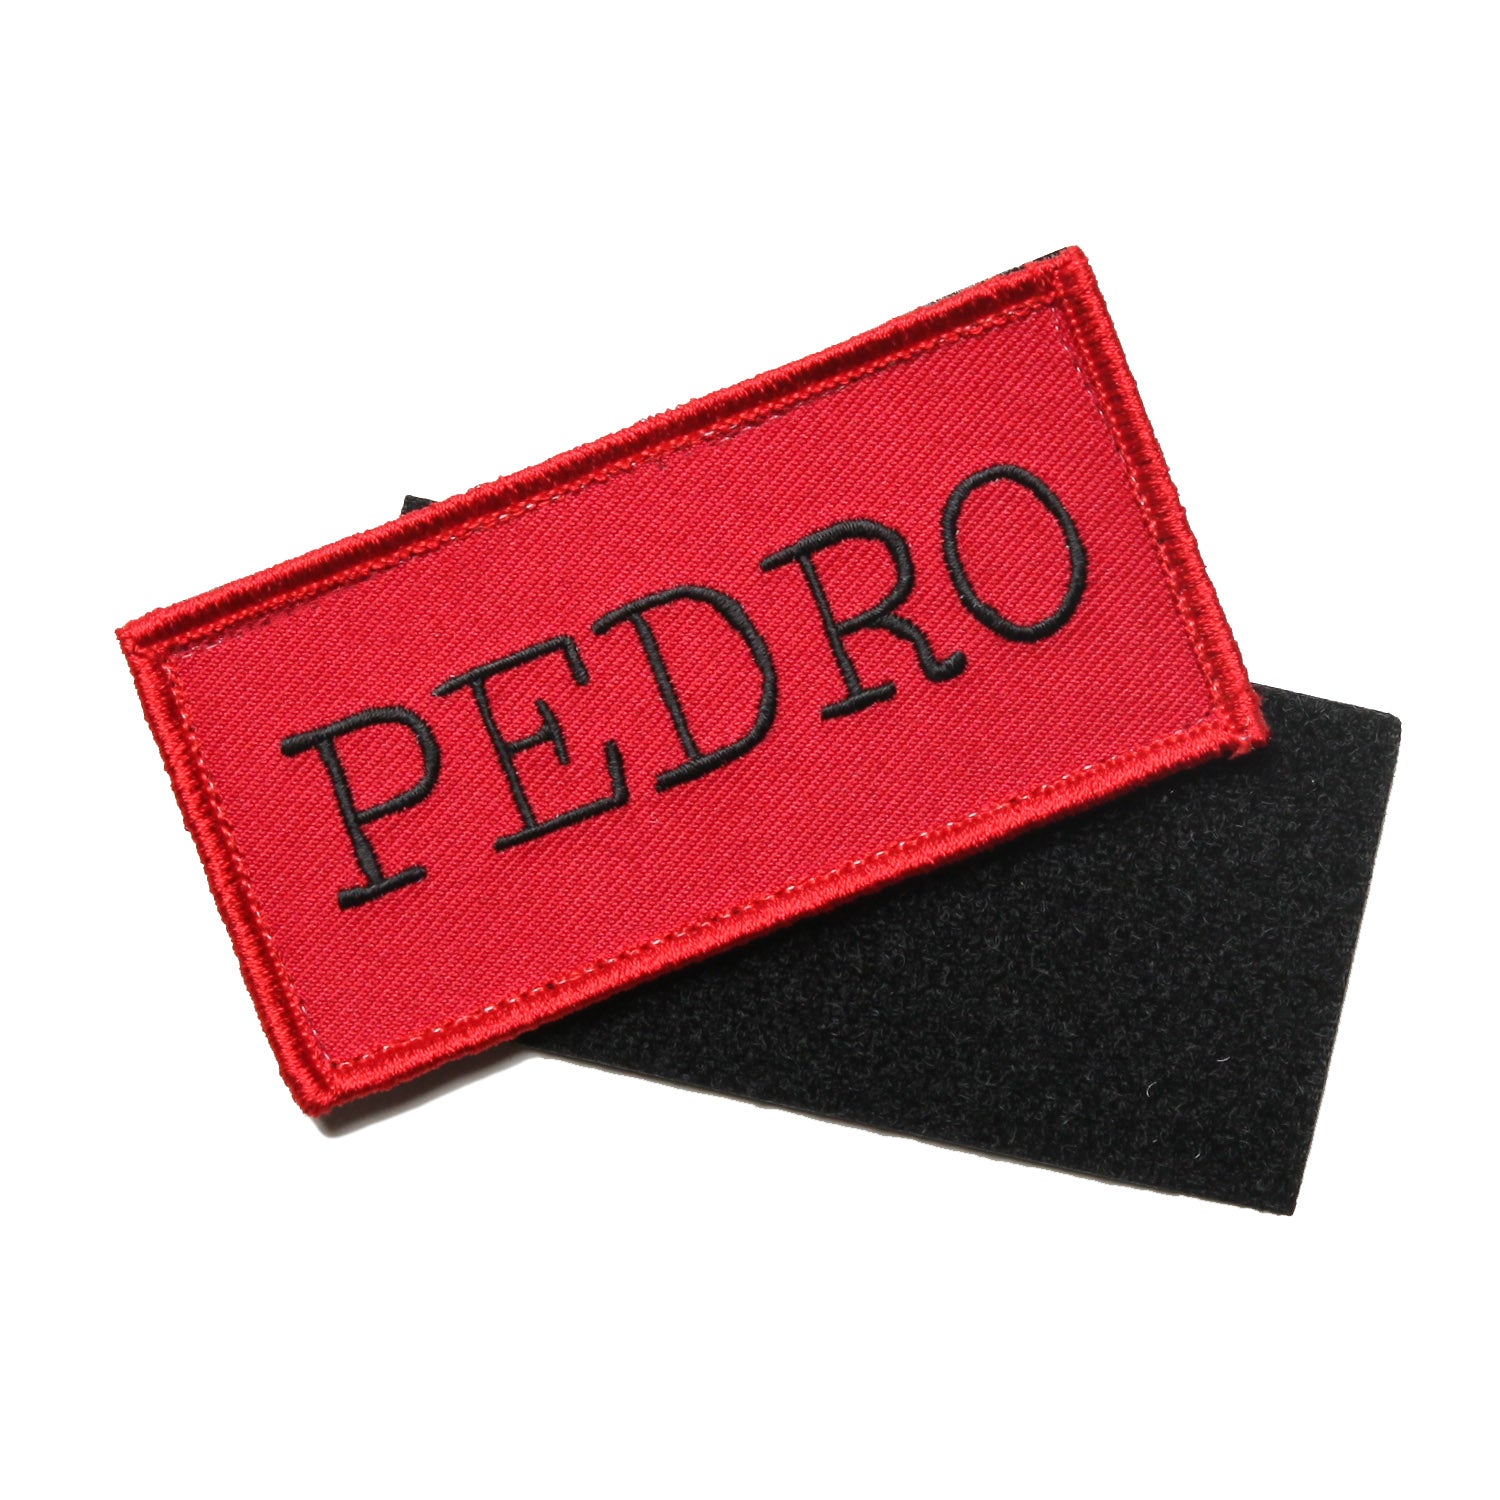 Kong Pedro Velcro Patch Red